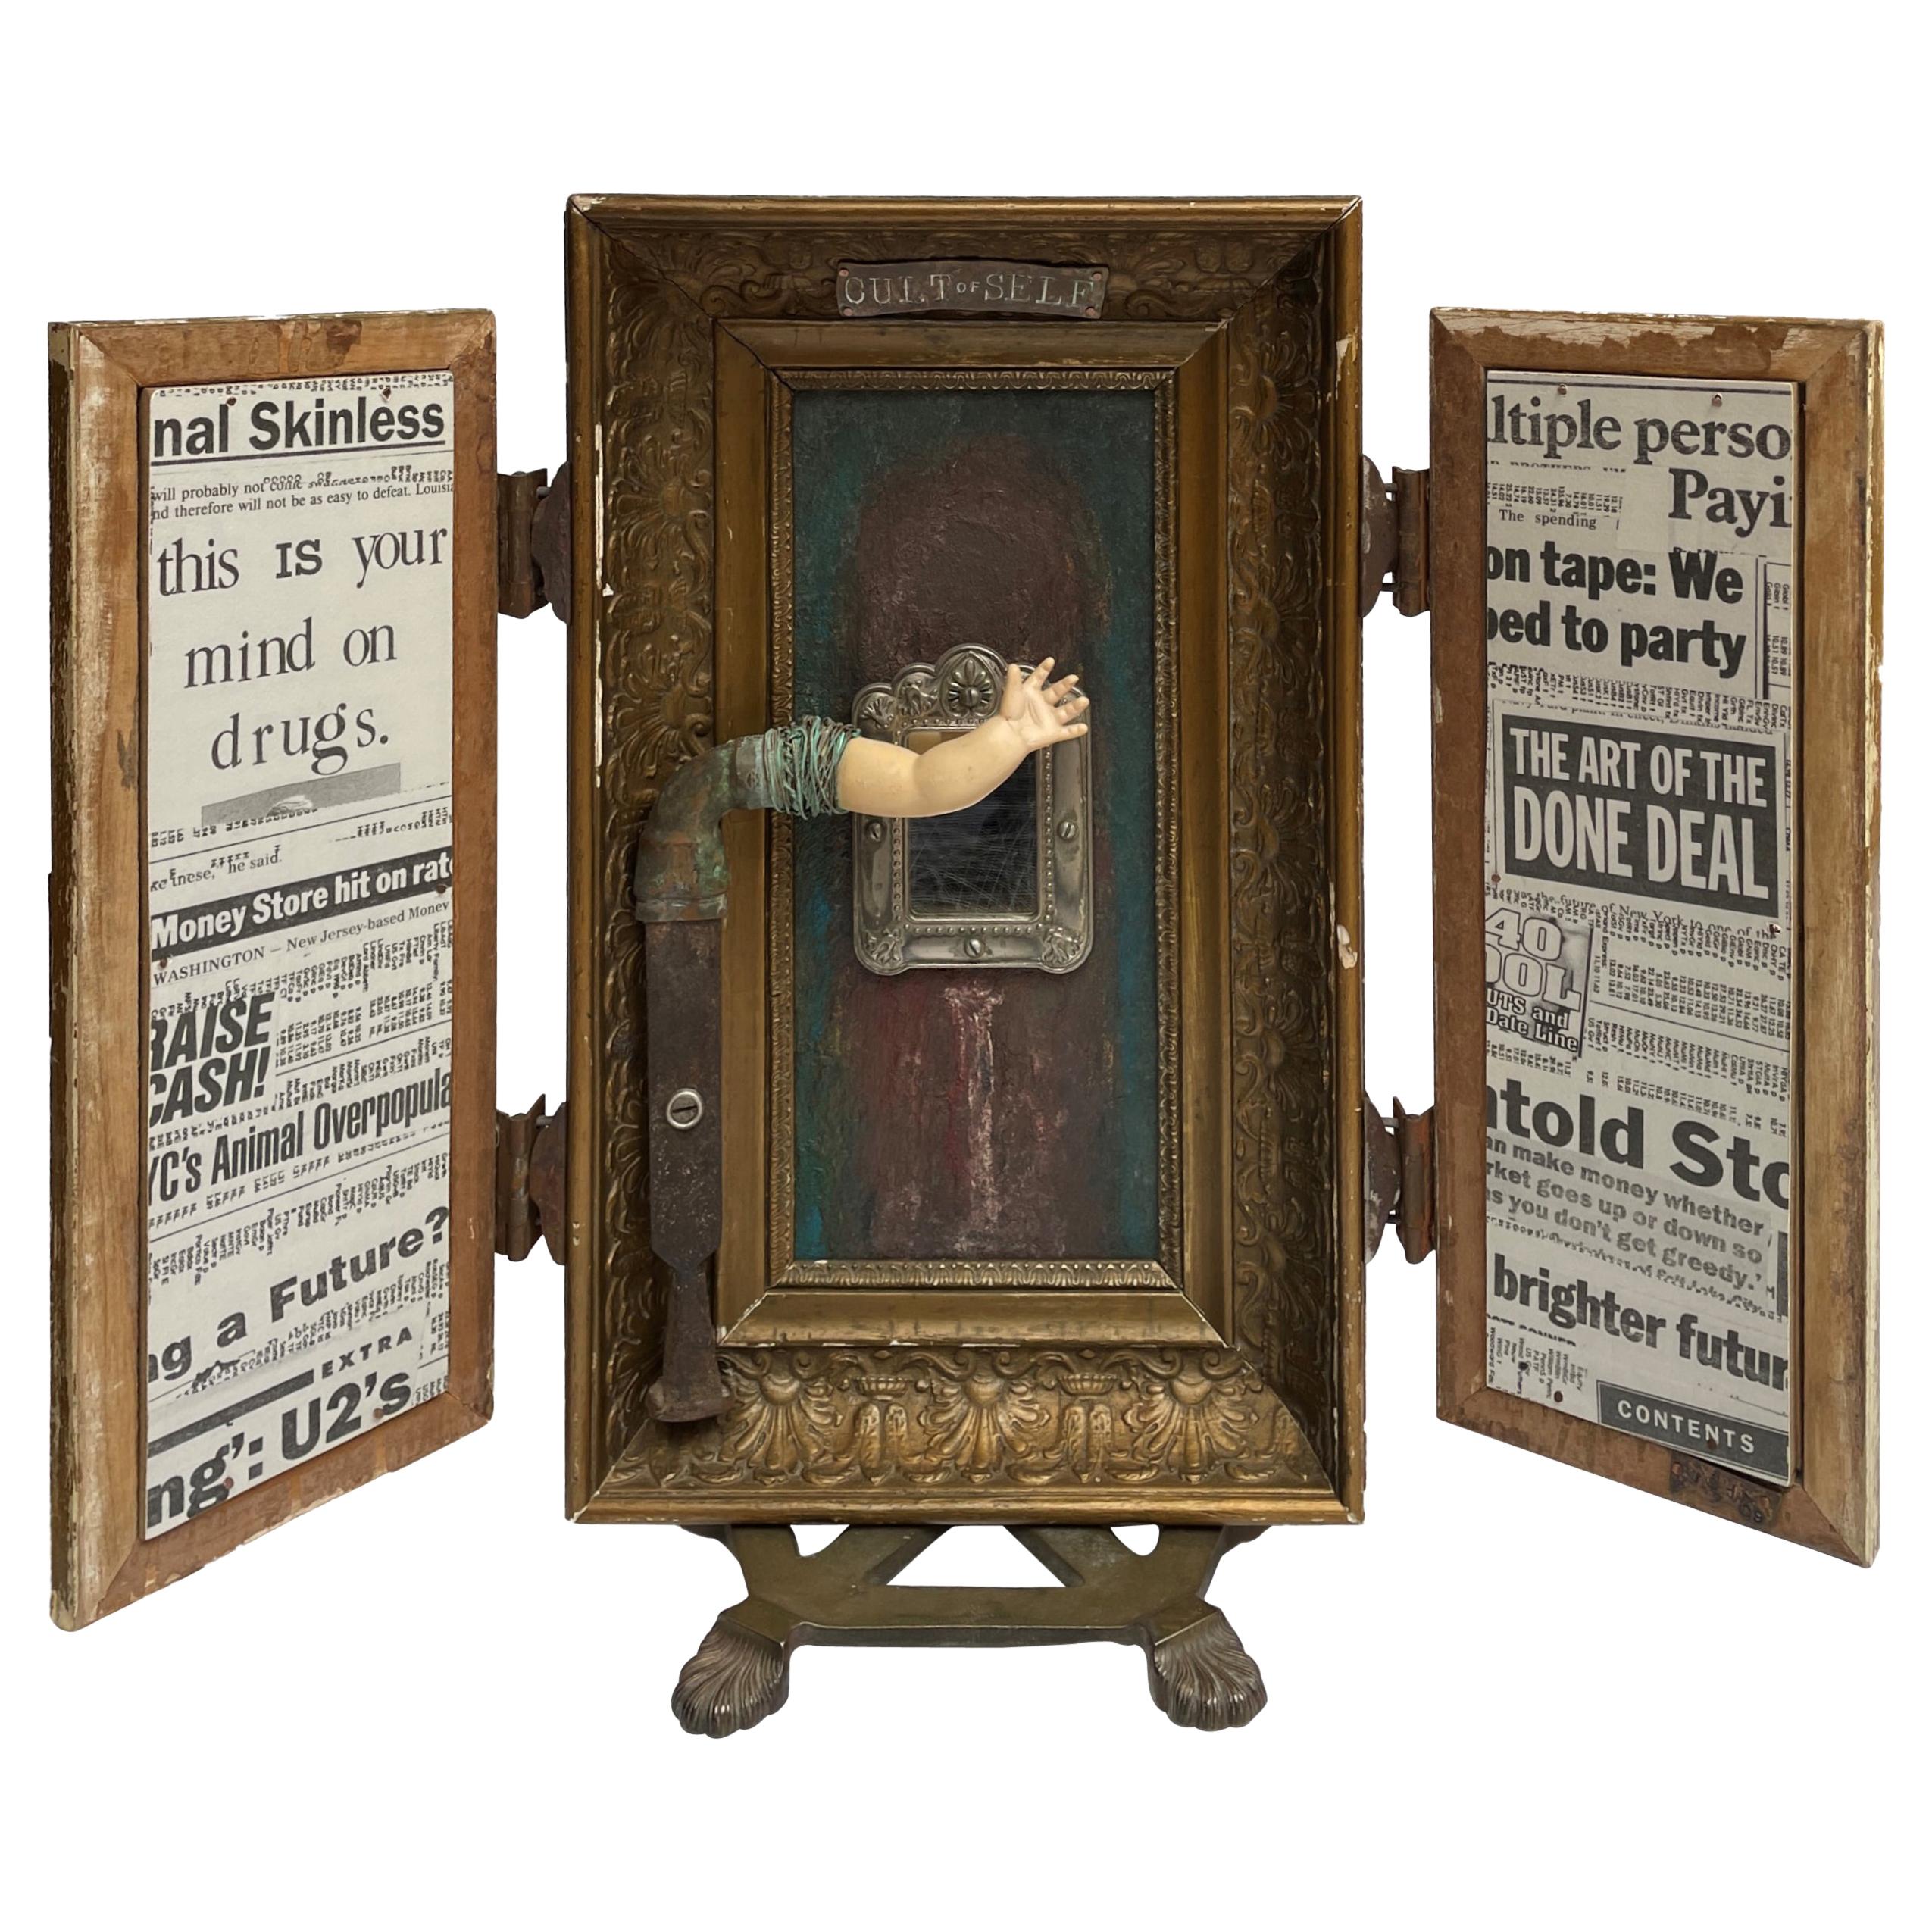 "The Cult of Self", Sculptural Object with Hidden Paintings and Moveable Frames